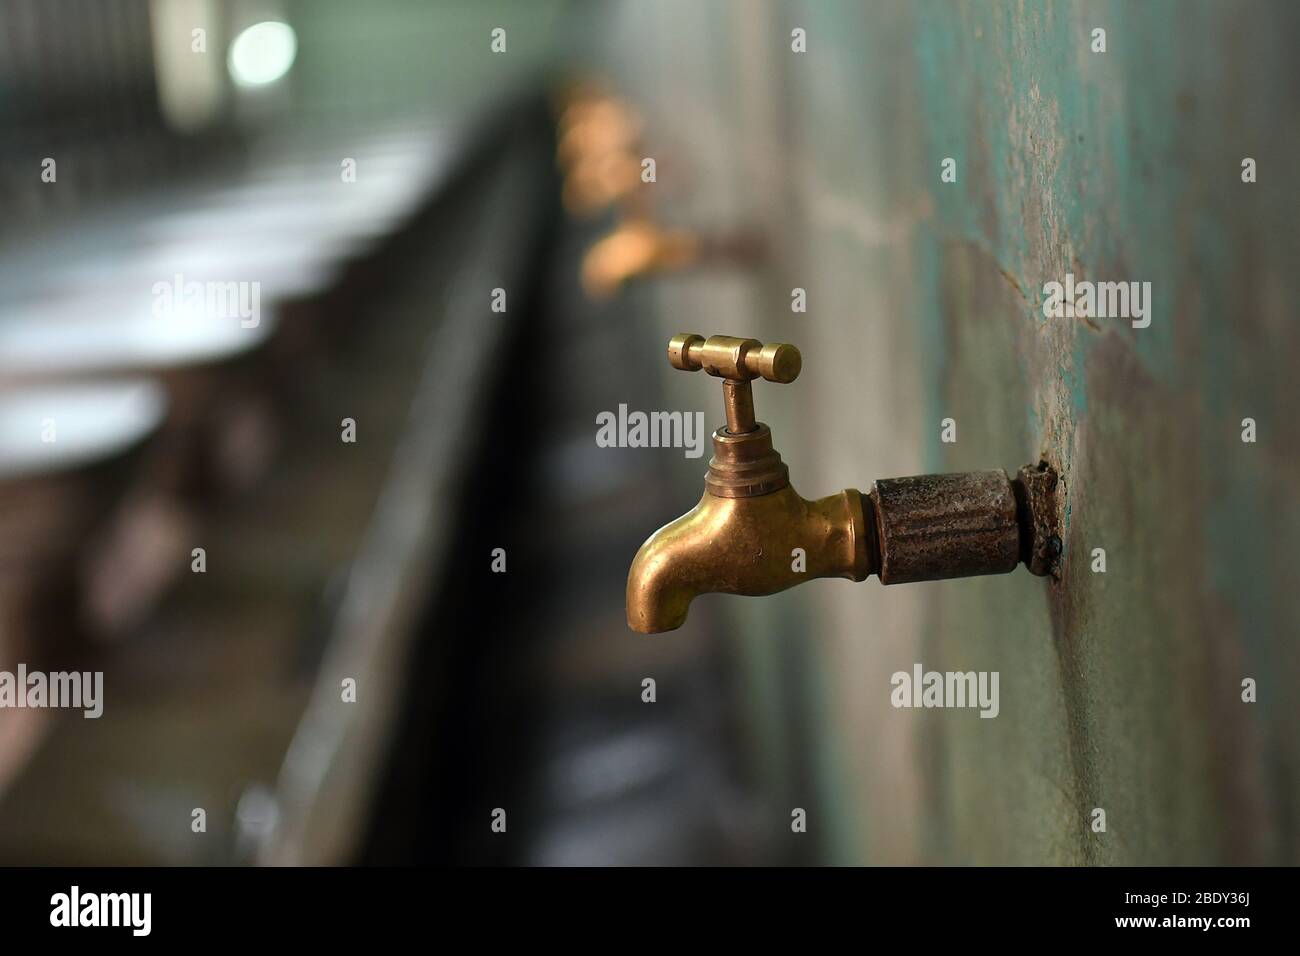 Dhaka 10 April 2020. View of an empty Ablution section inside the Baitul Mukarram National Mosque during the lockdown amid coronavirus outbreak in Dha Stock Photo